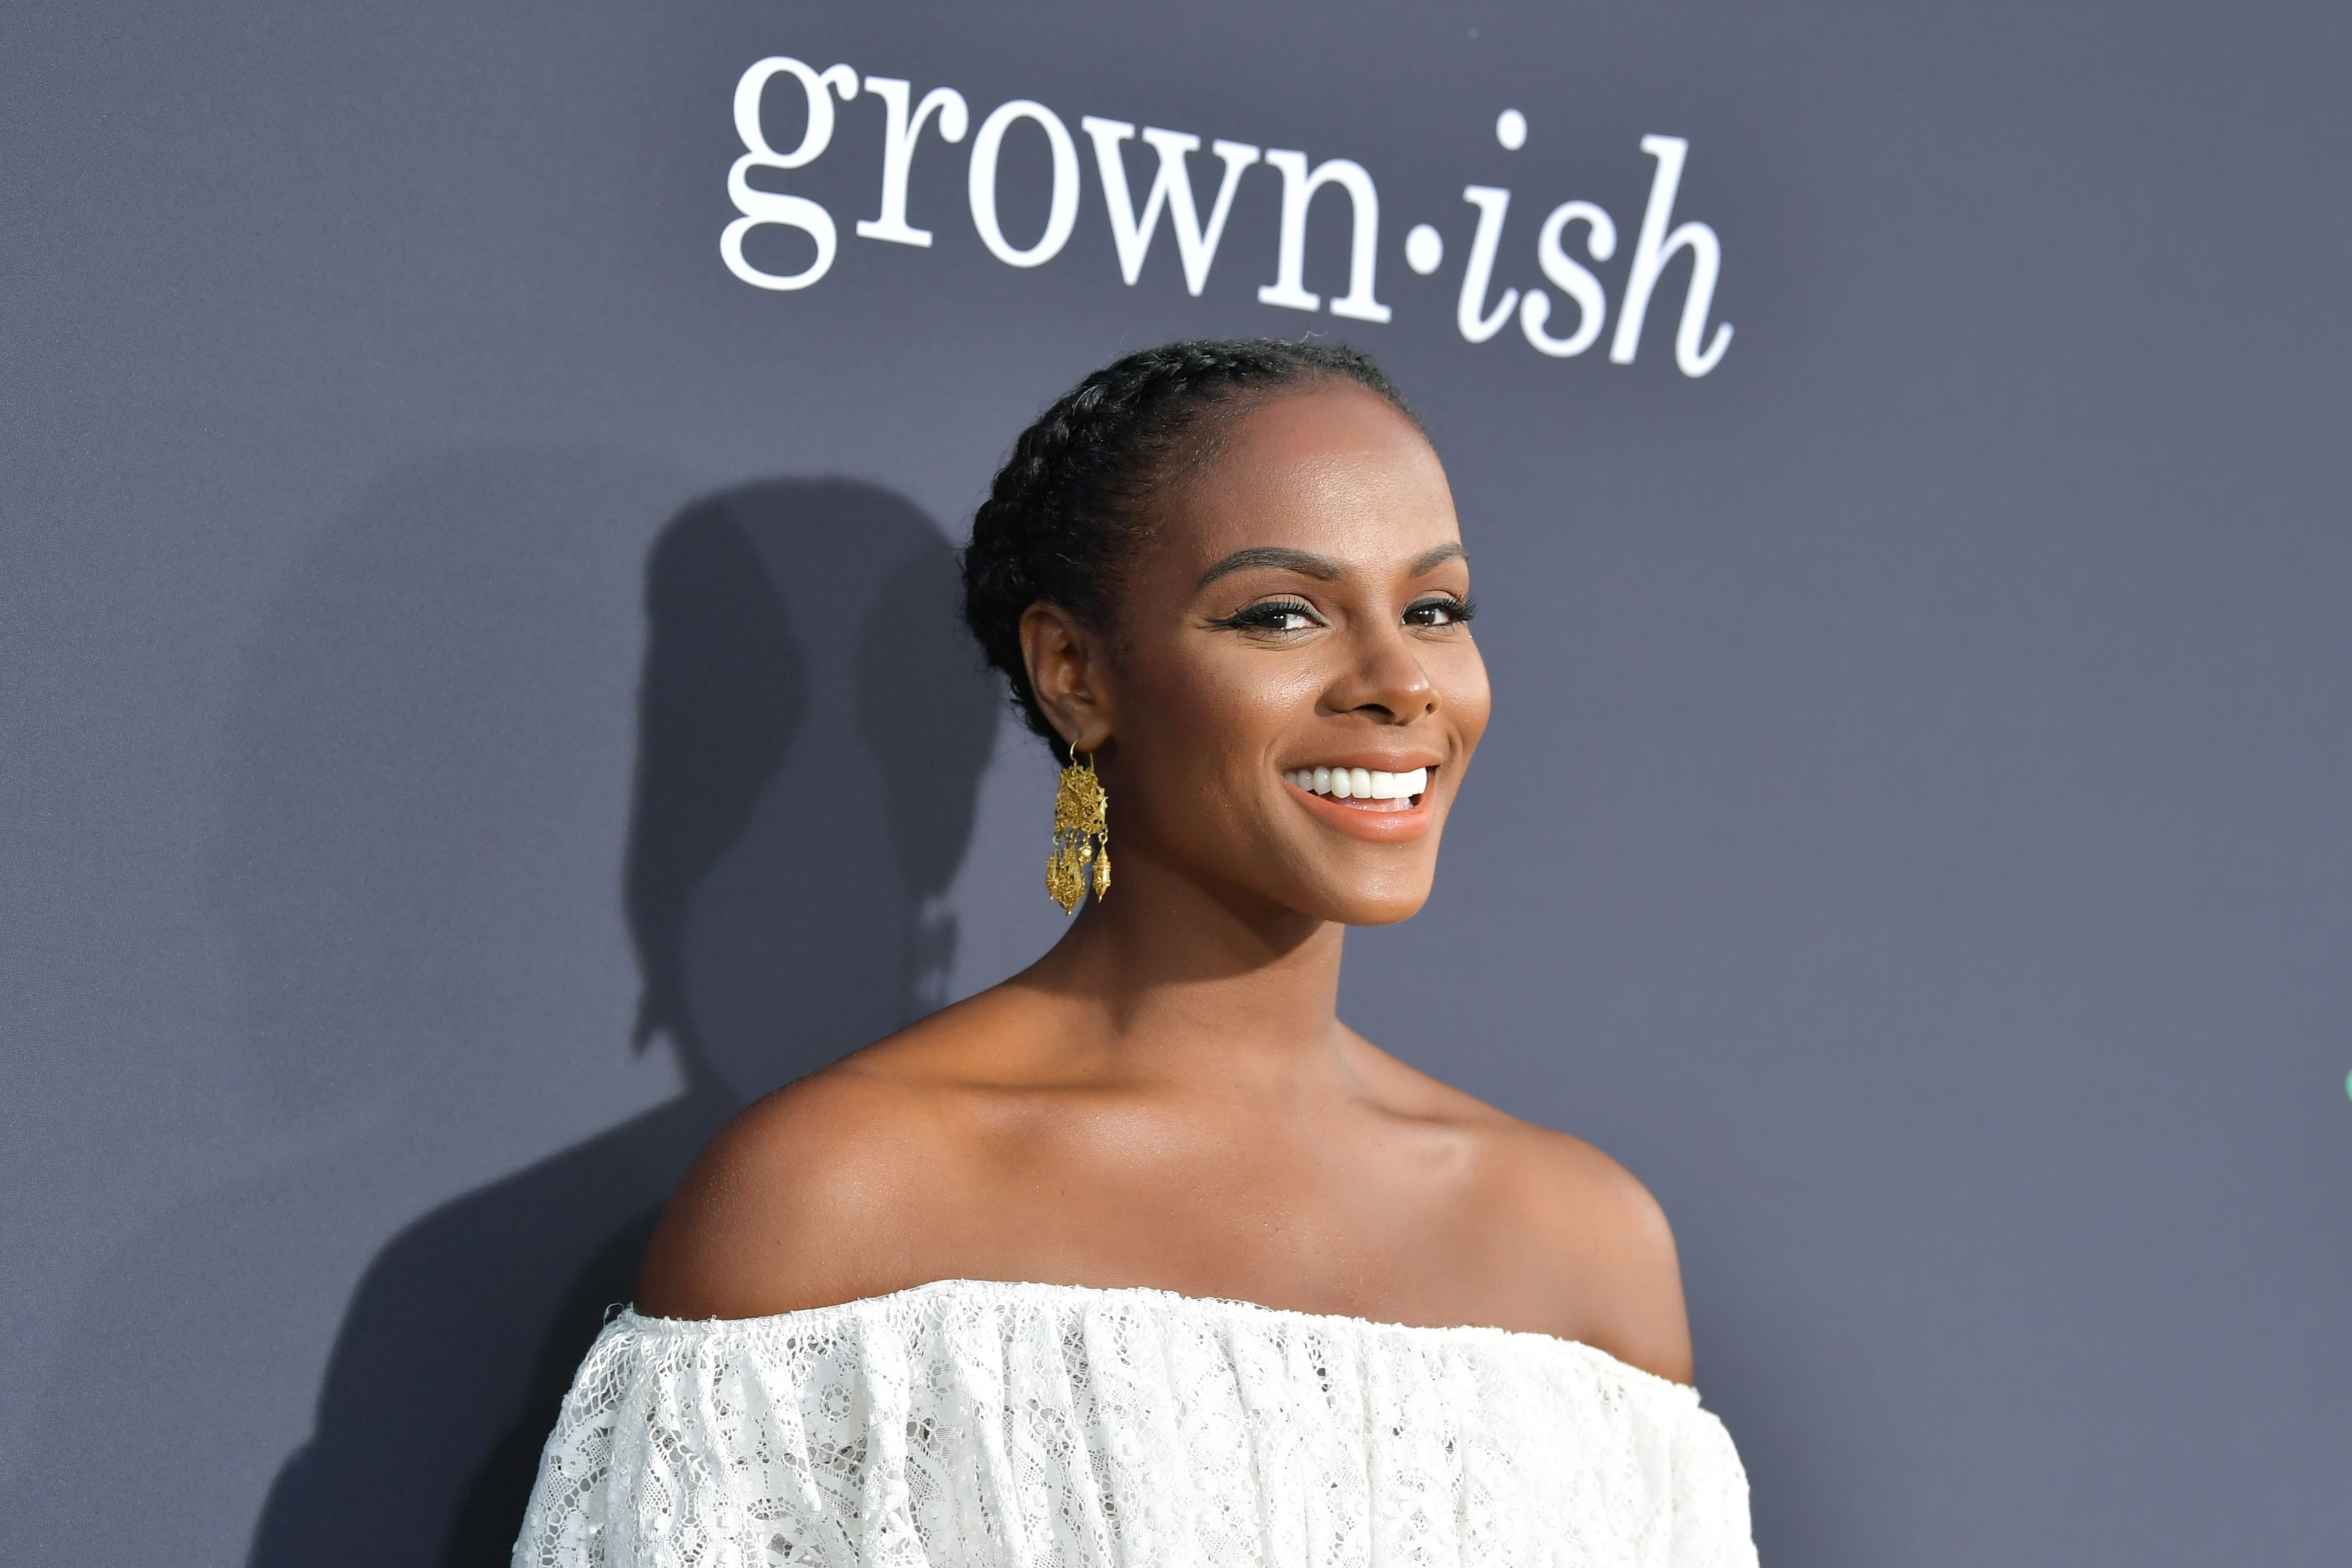 Tika Sumpter at POPSUGAR X ABC "Embrace Your Ish" Event at Goya Studios on September 17, 2019 in Los Angeles, California. | Photo: Getty Images